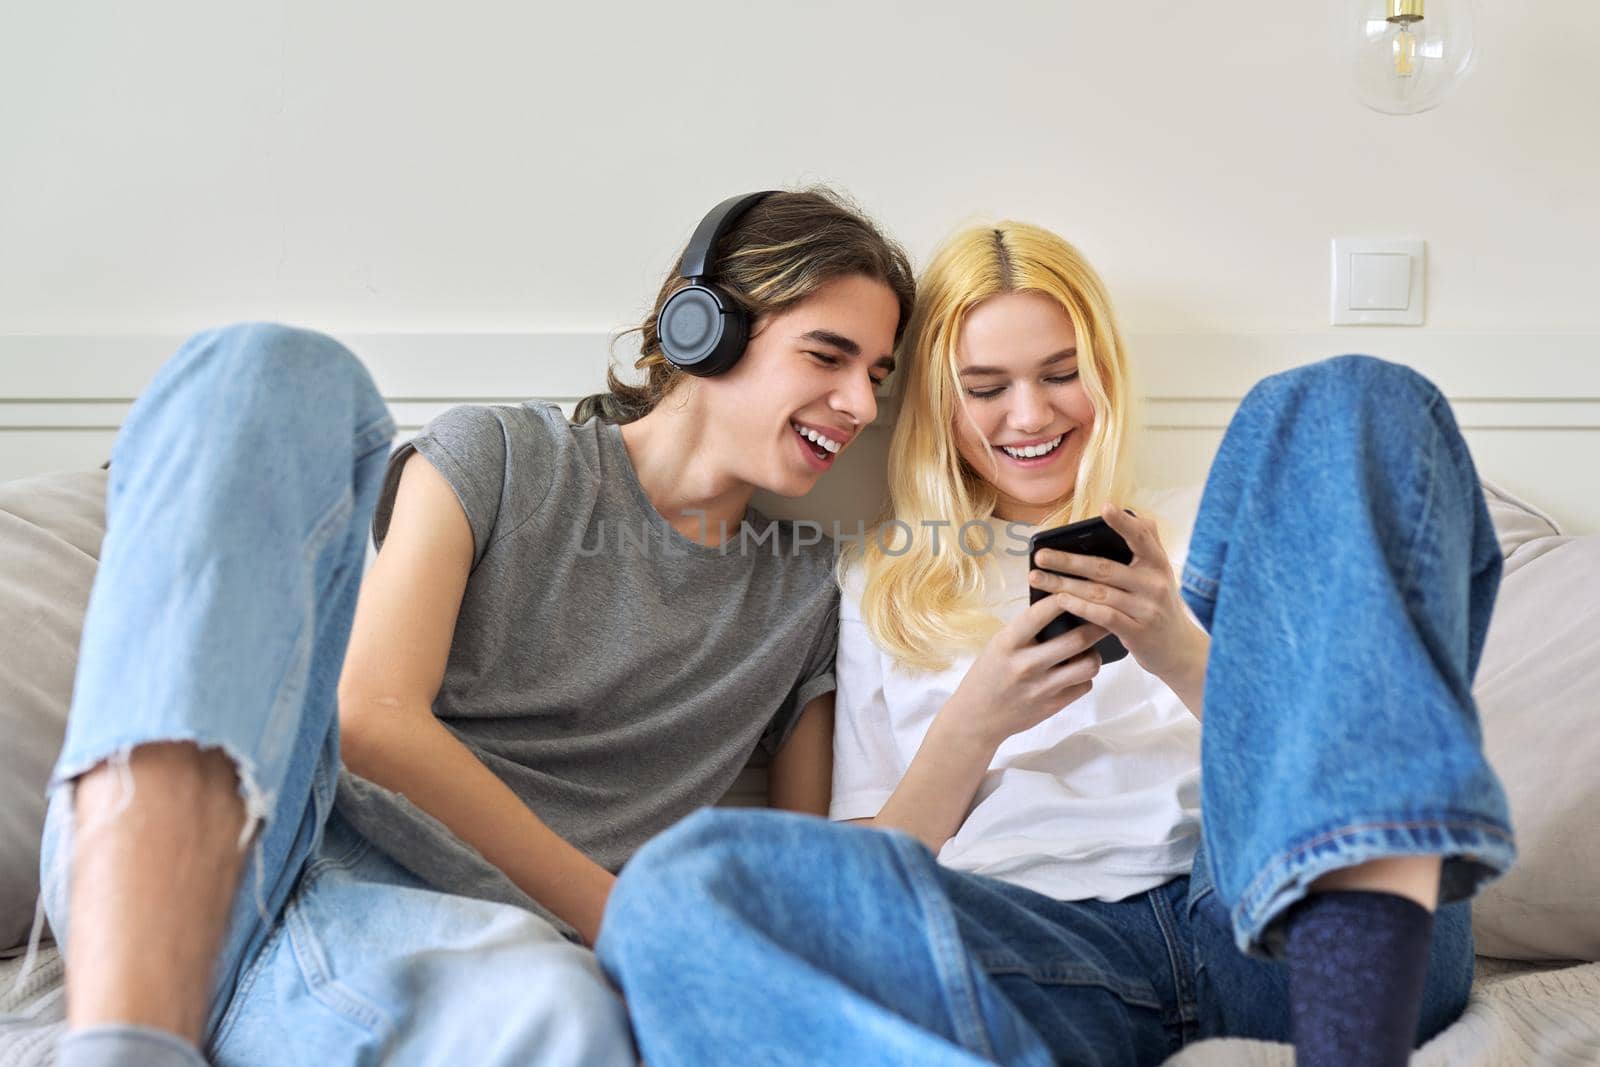 Couple of cheerful emotional teenagers friends having fun together, sitting on couch looking into smartphone. Adolescents male and female 15, 16 years old, technology, lifestyle, fun, friendship